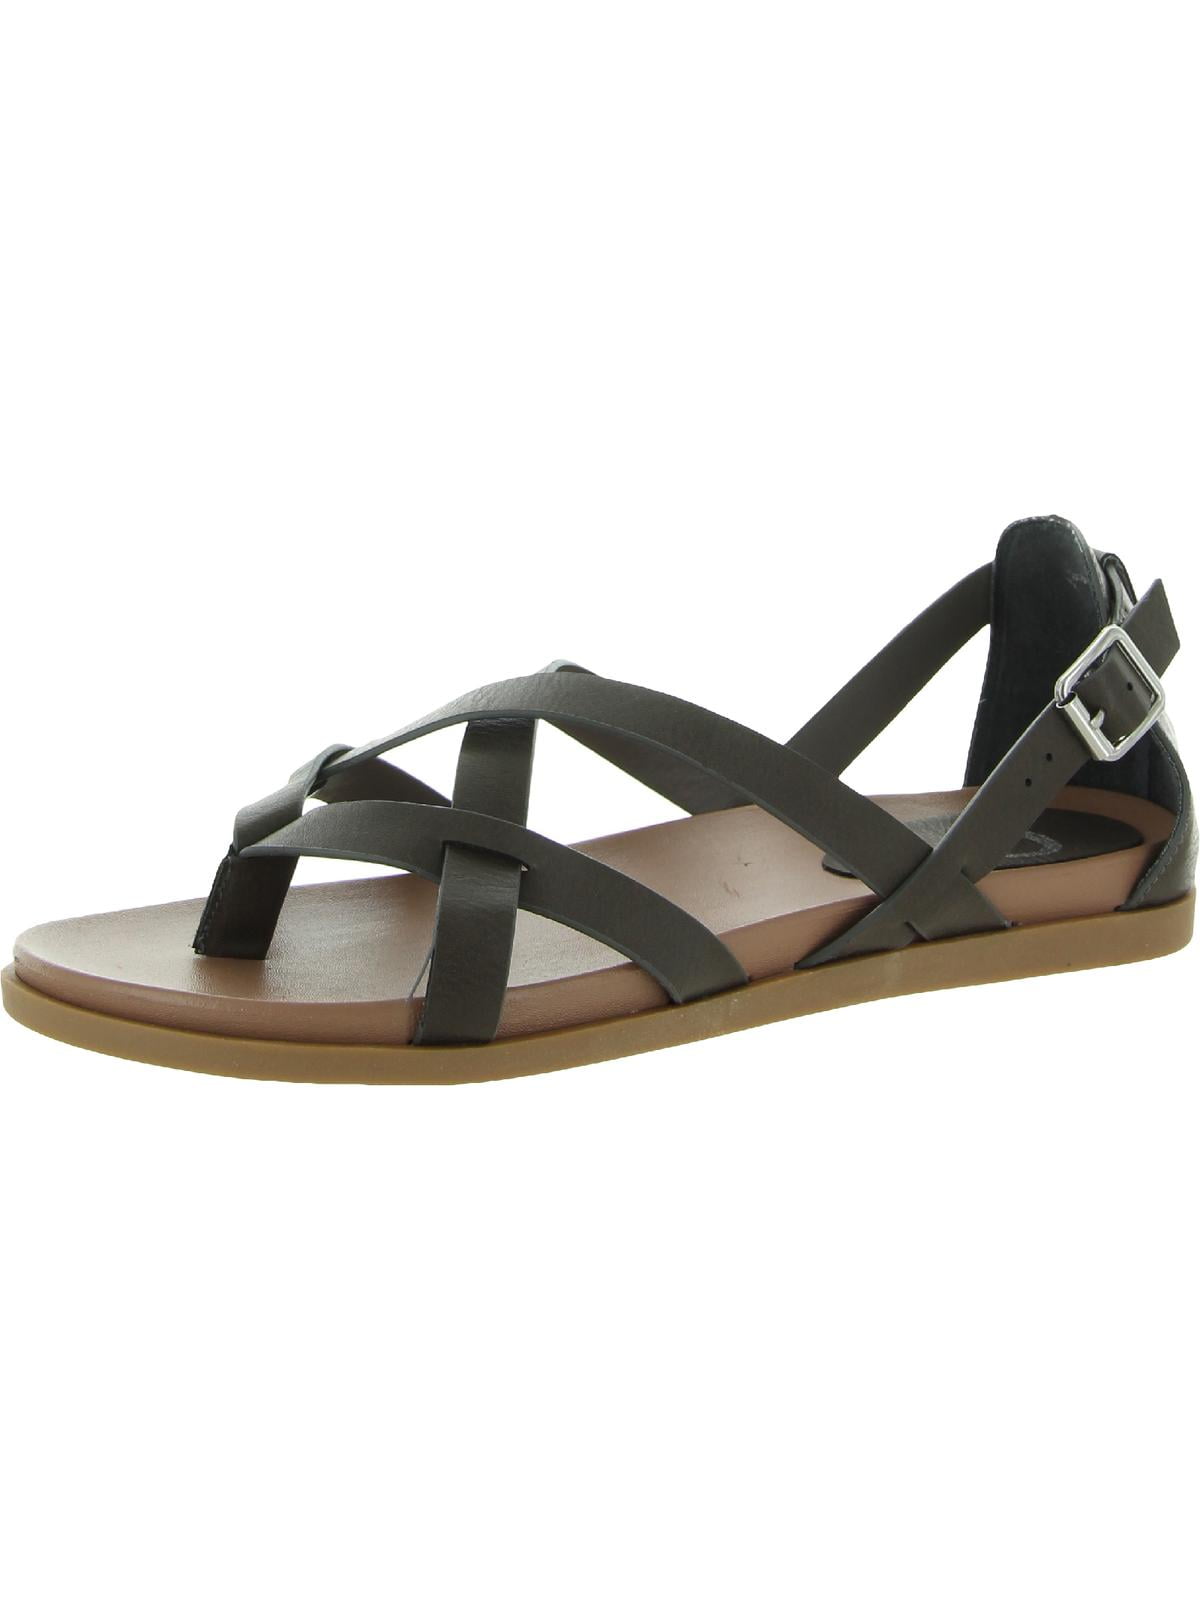 Journee Collection Womens Ziporah Faux Leather Strappy Flat Sandals ...